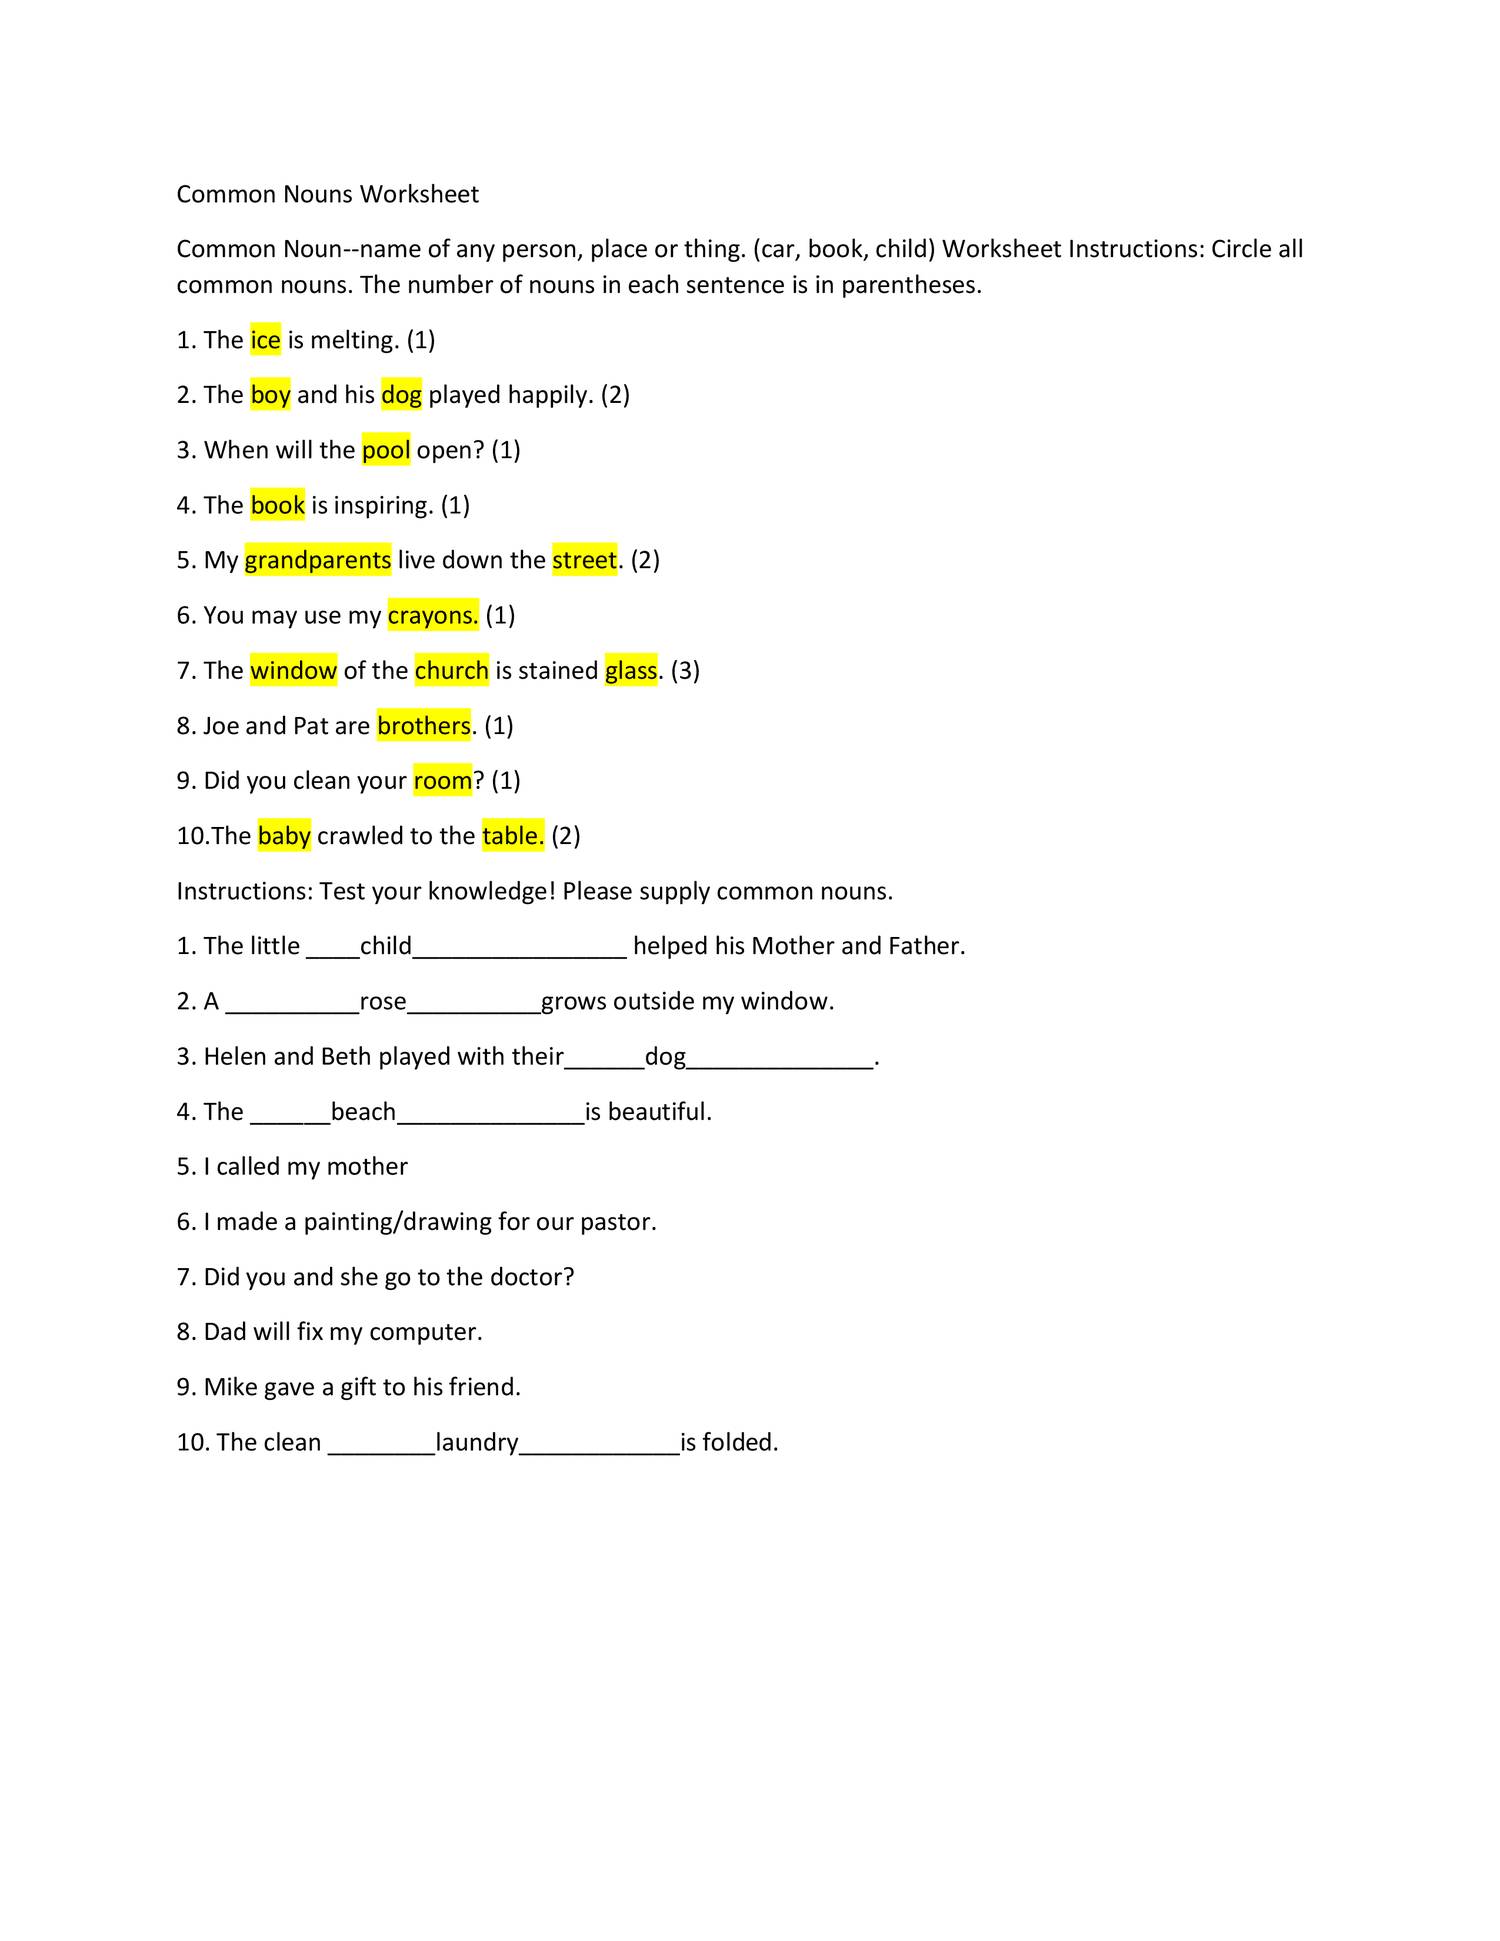 Common Nouns Worksheet answers docx DocDroid